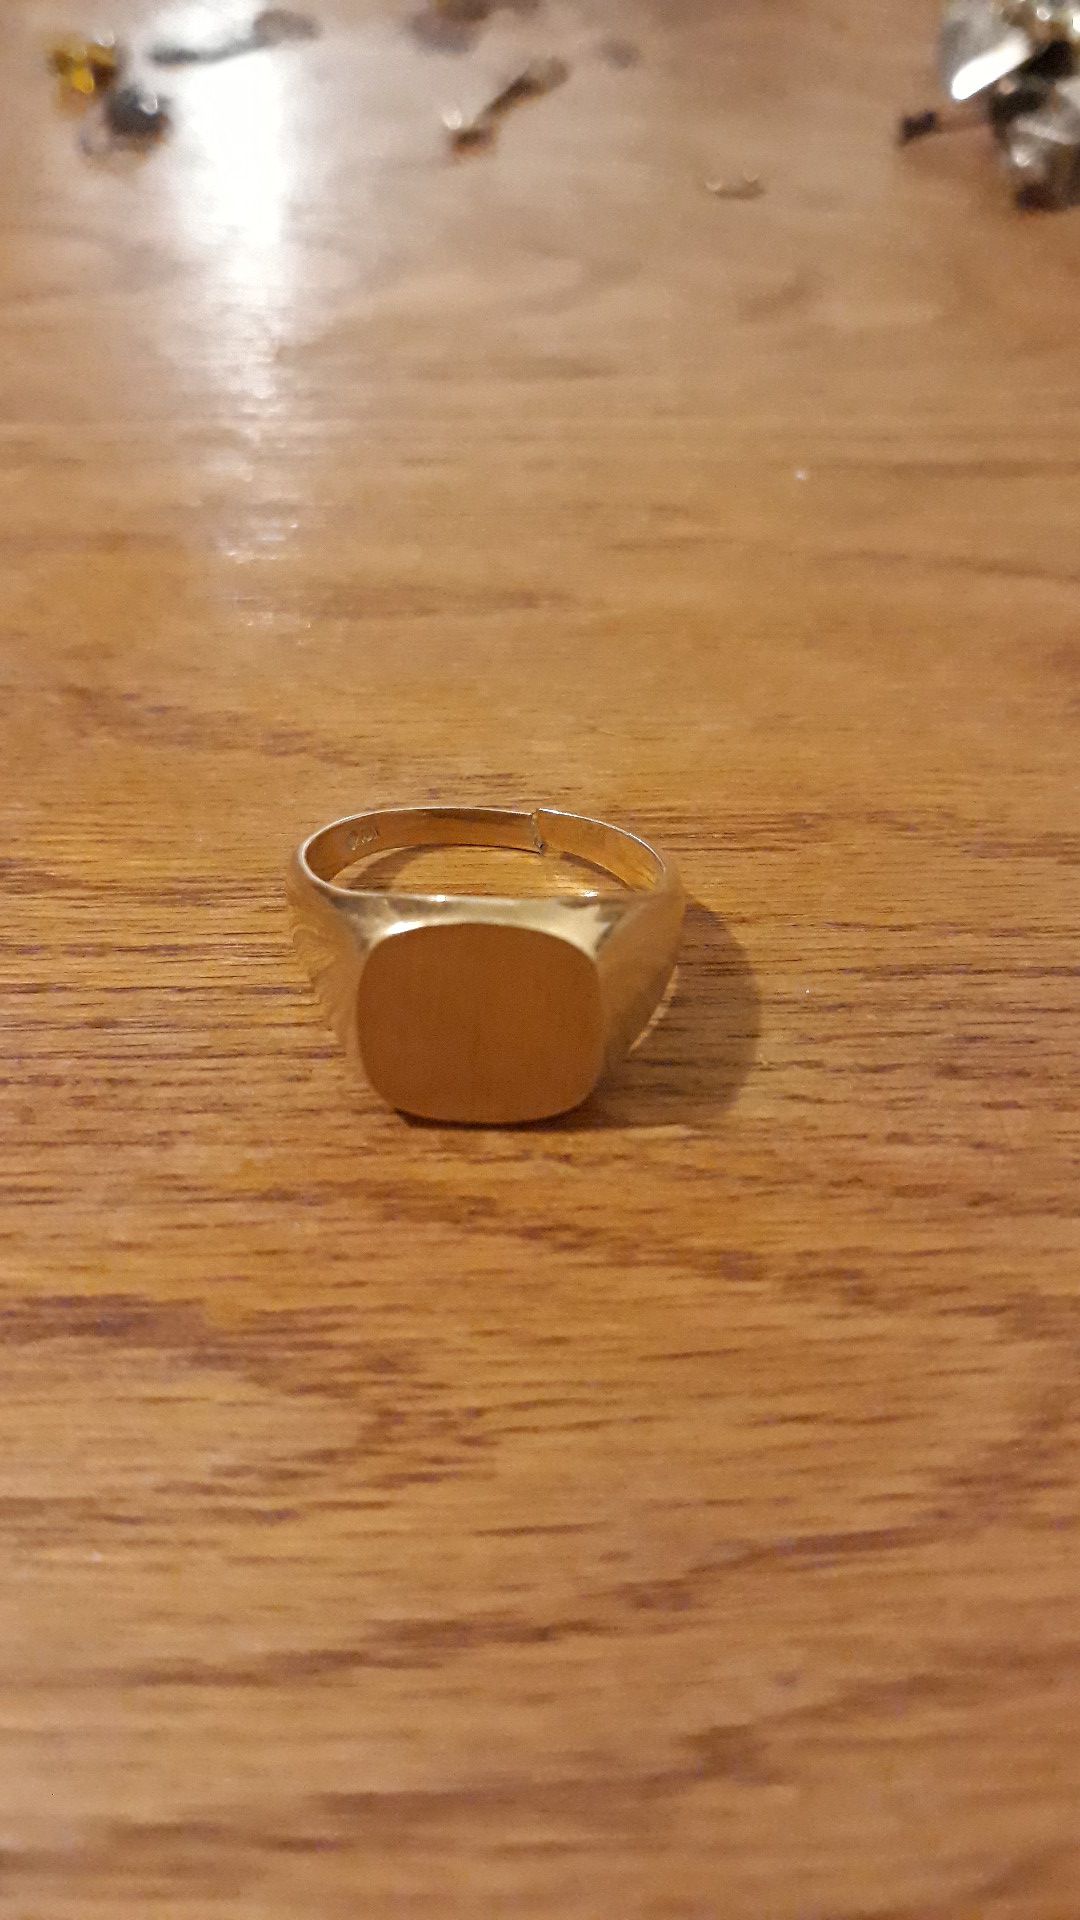 Gold mens ring and a resized broken ring